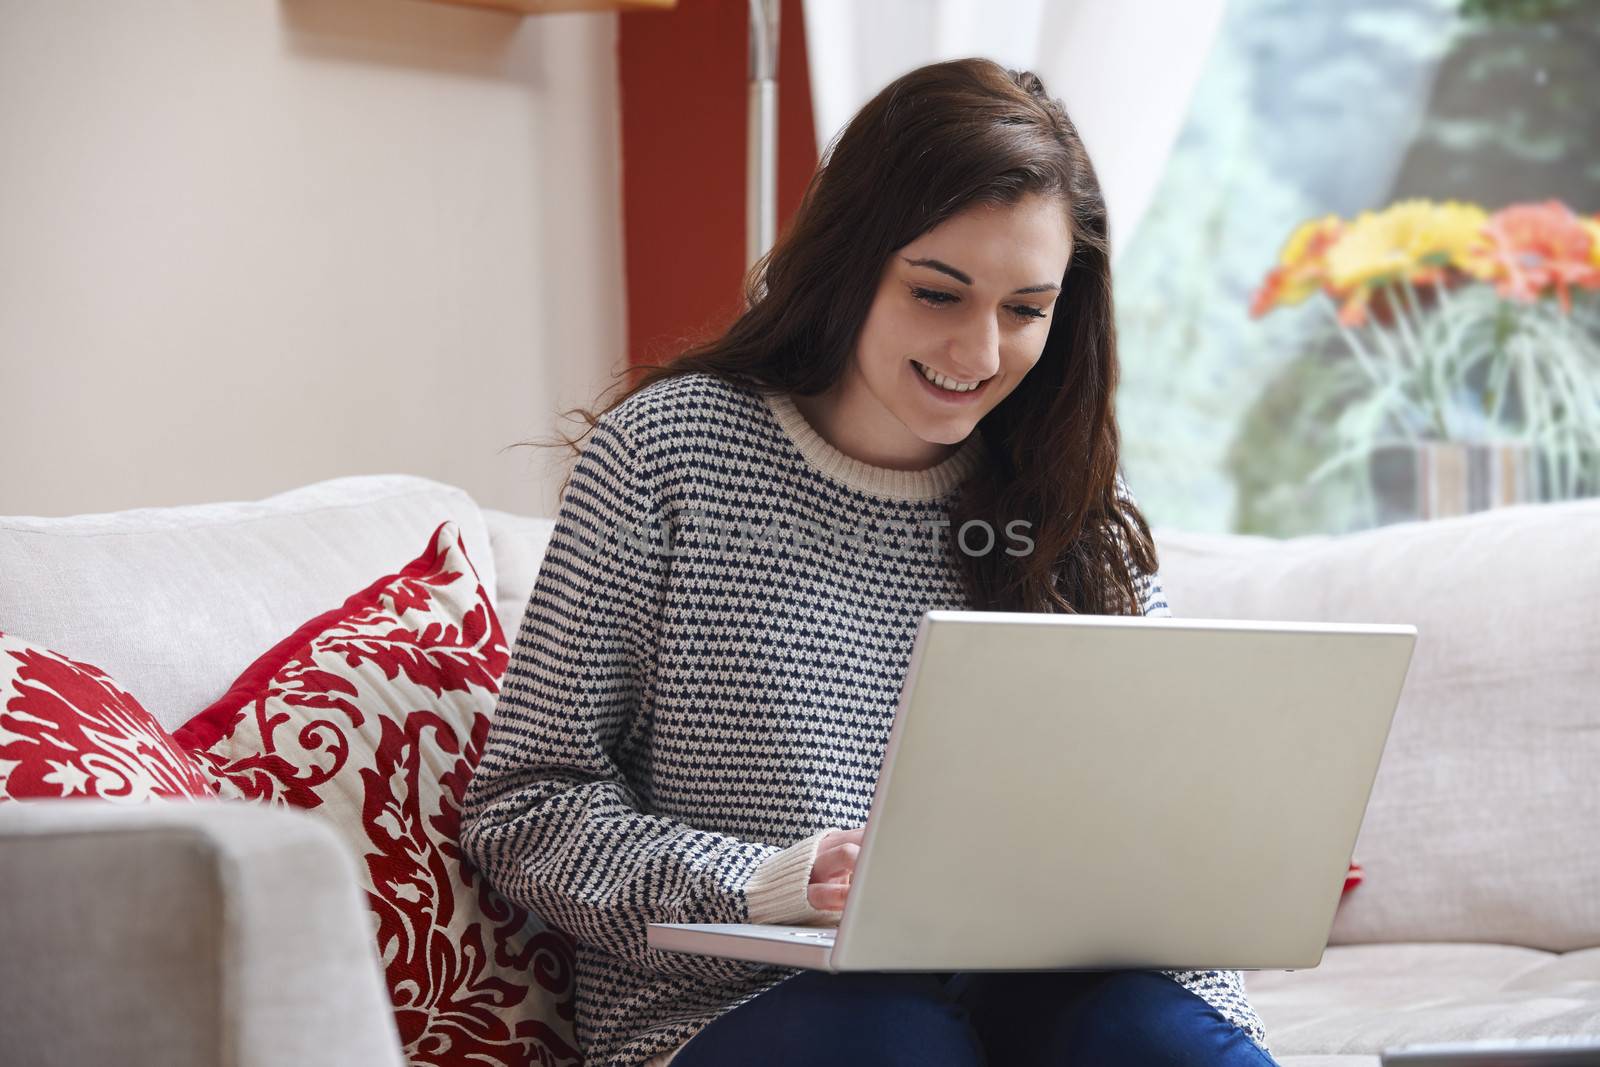 Teenage girl using a laptop computer while sitting at home